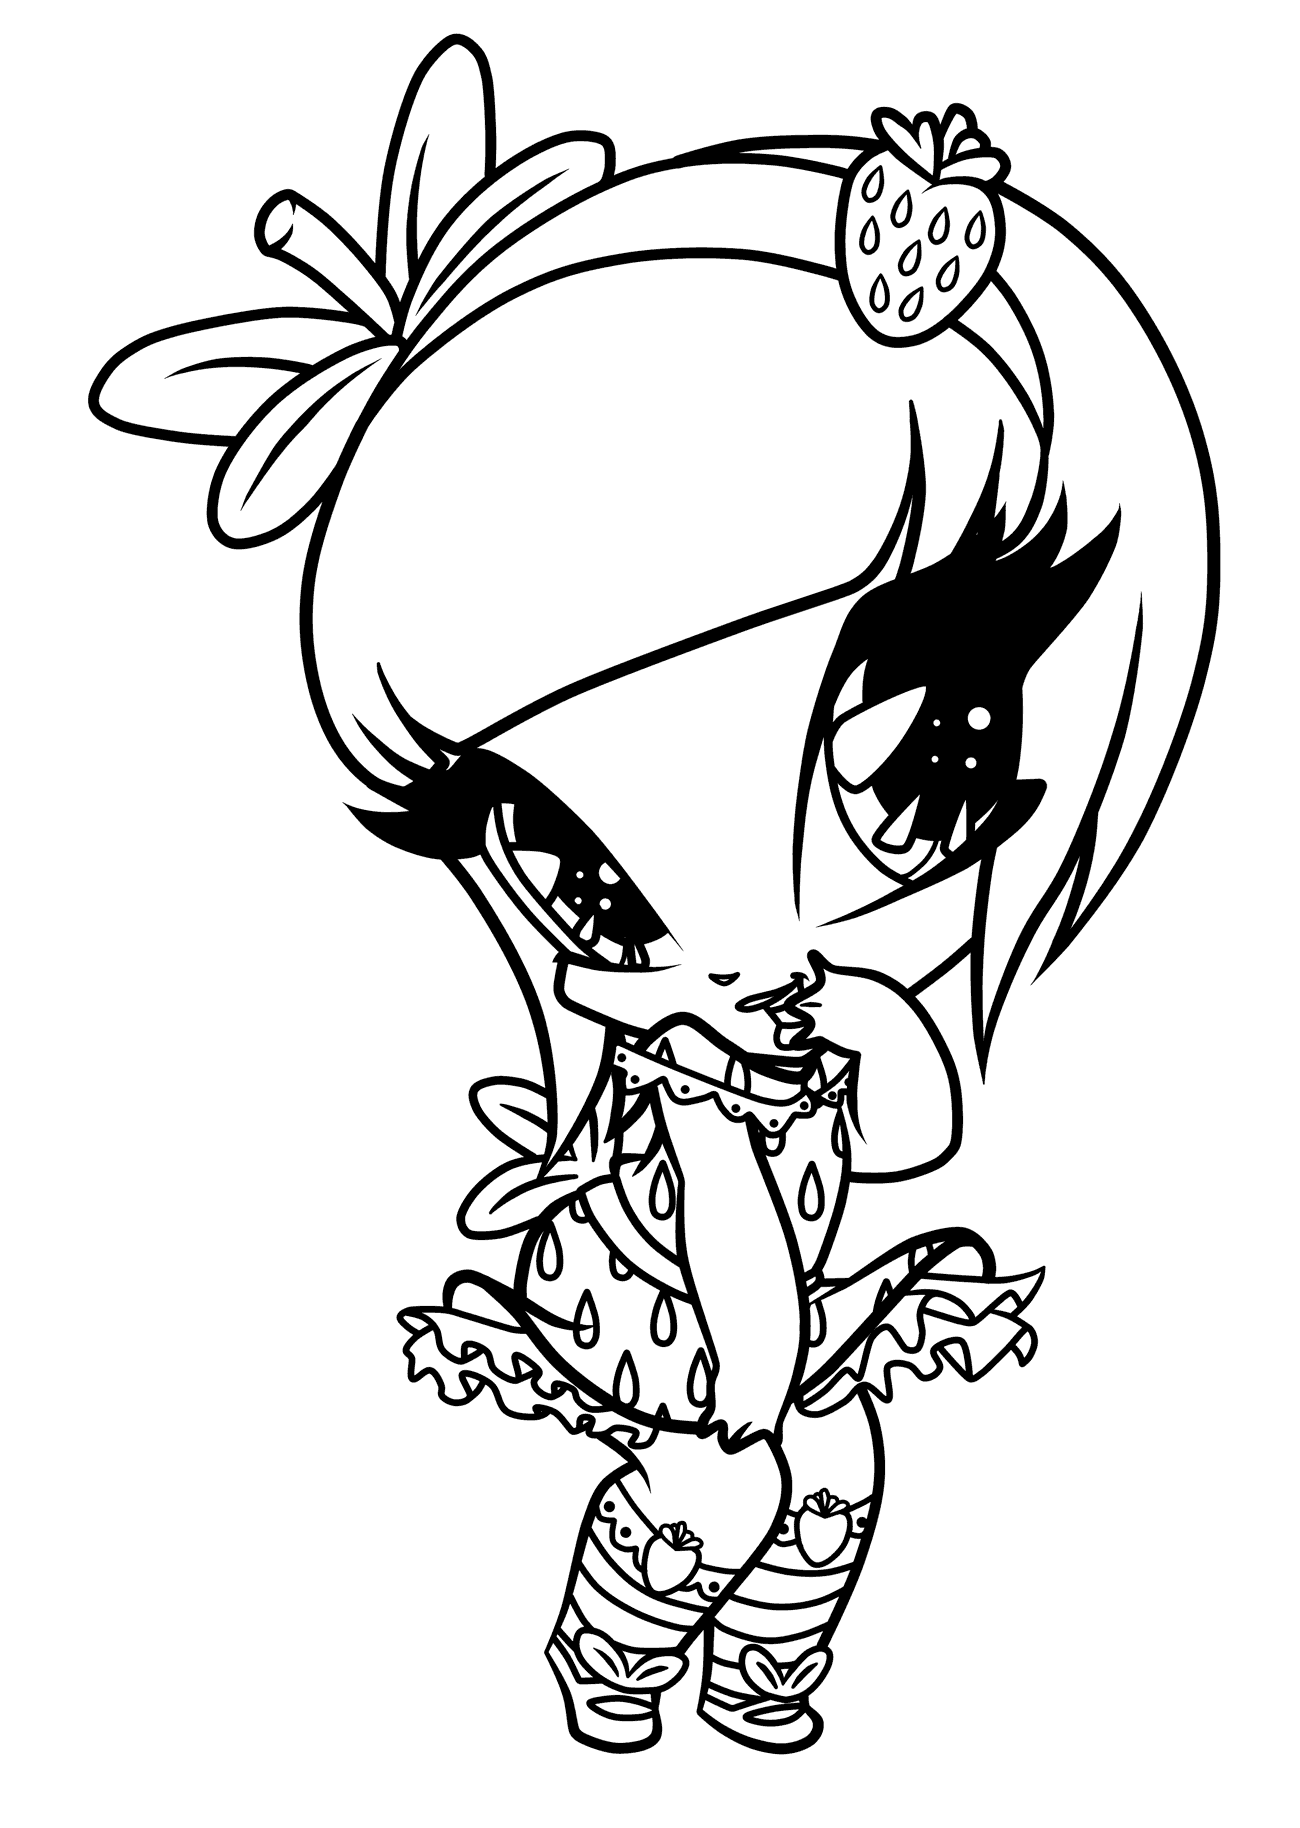 Winx Pixie coloring pages to download and print for free